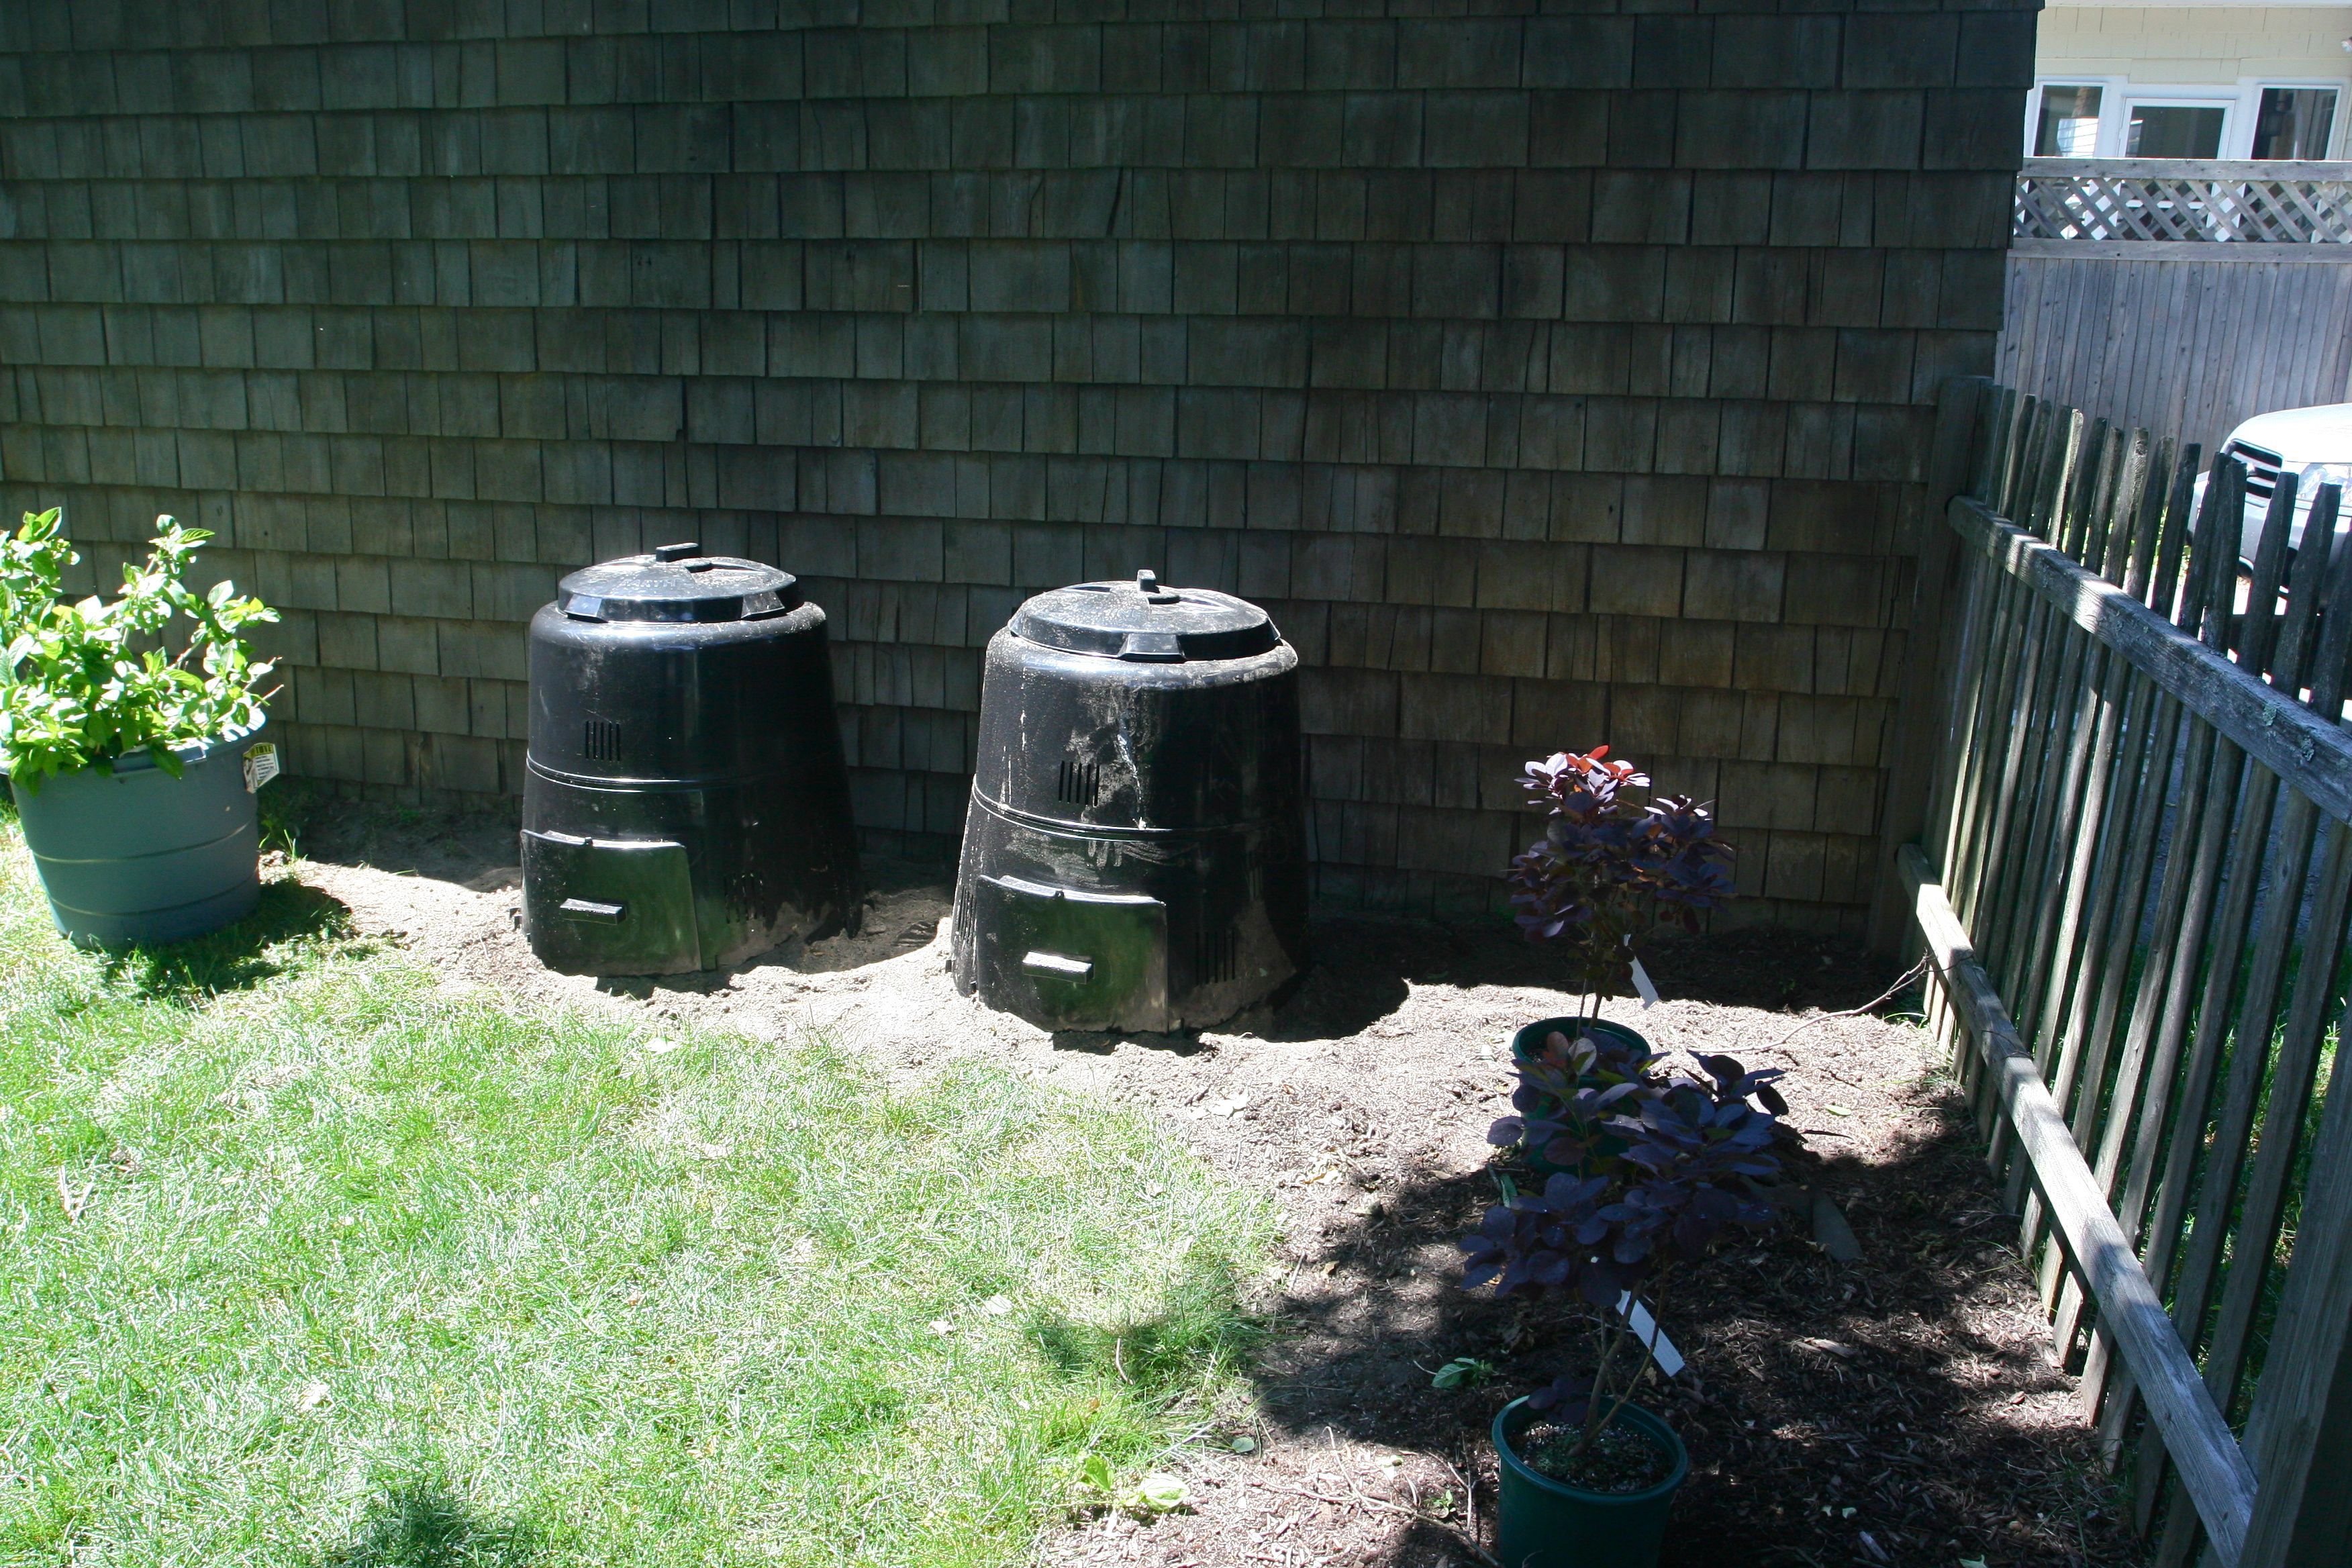 Ok, so here's a BEFORE up close. When we first put the bins in we thought we'd hide them with bushes and shrubs.